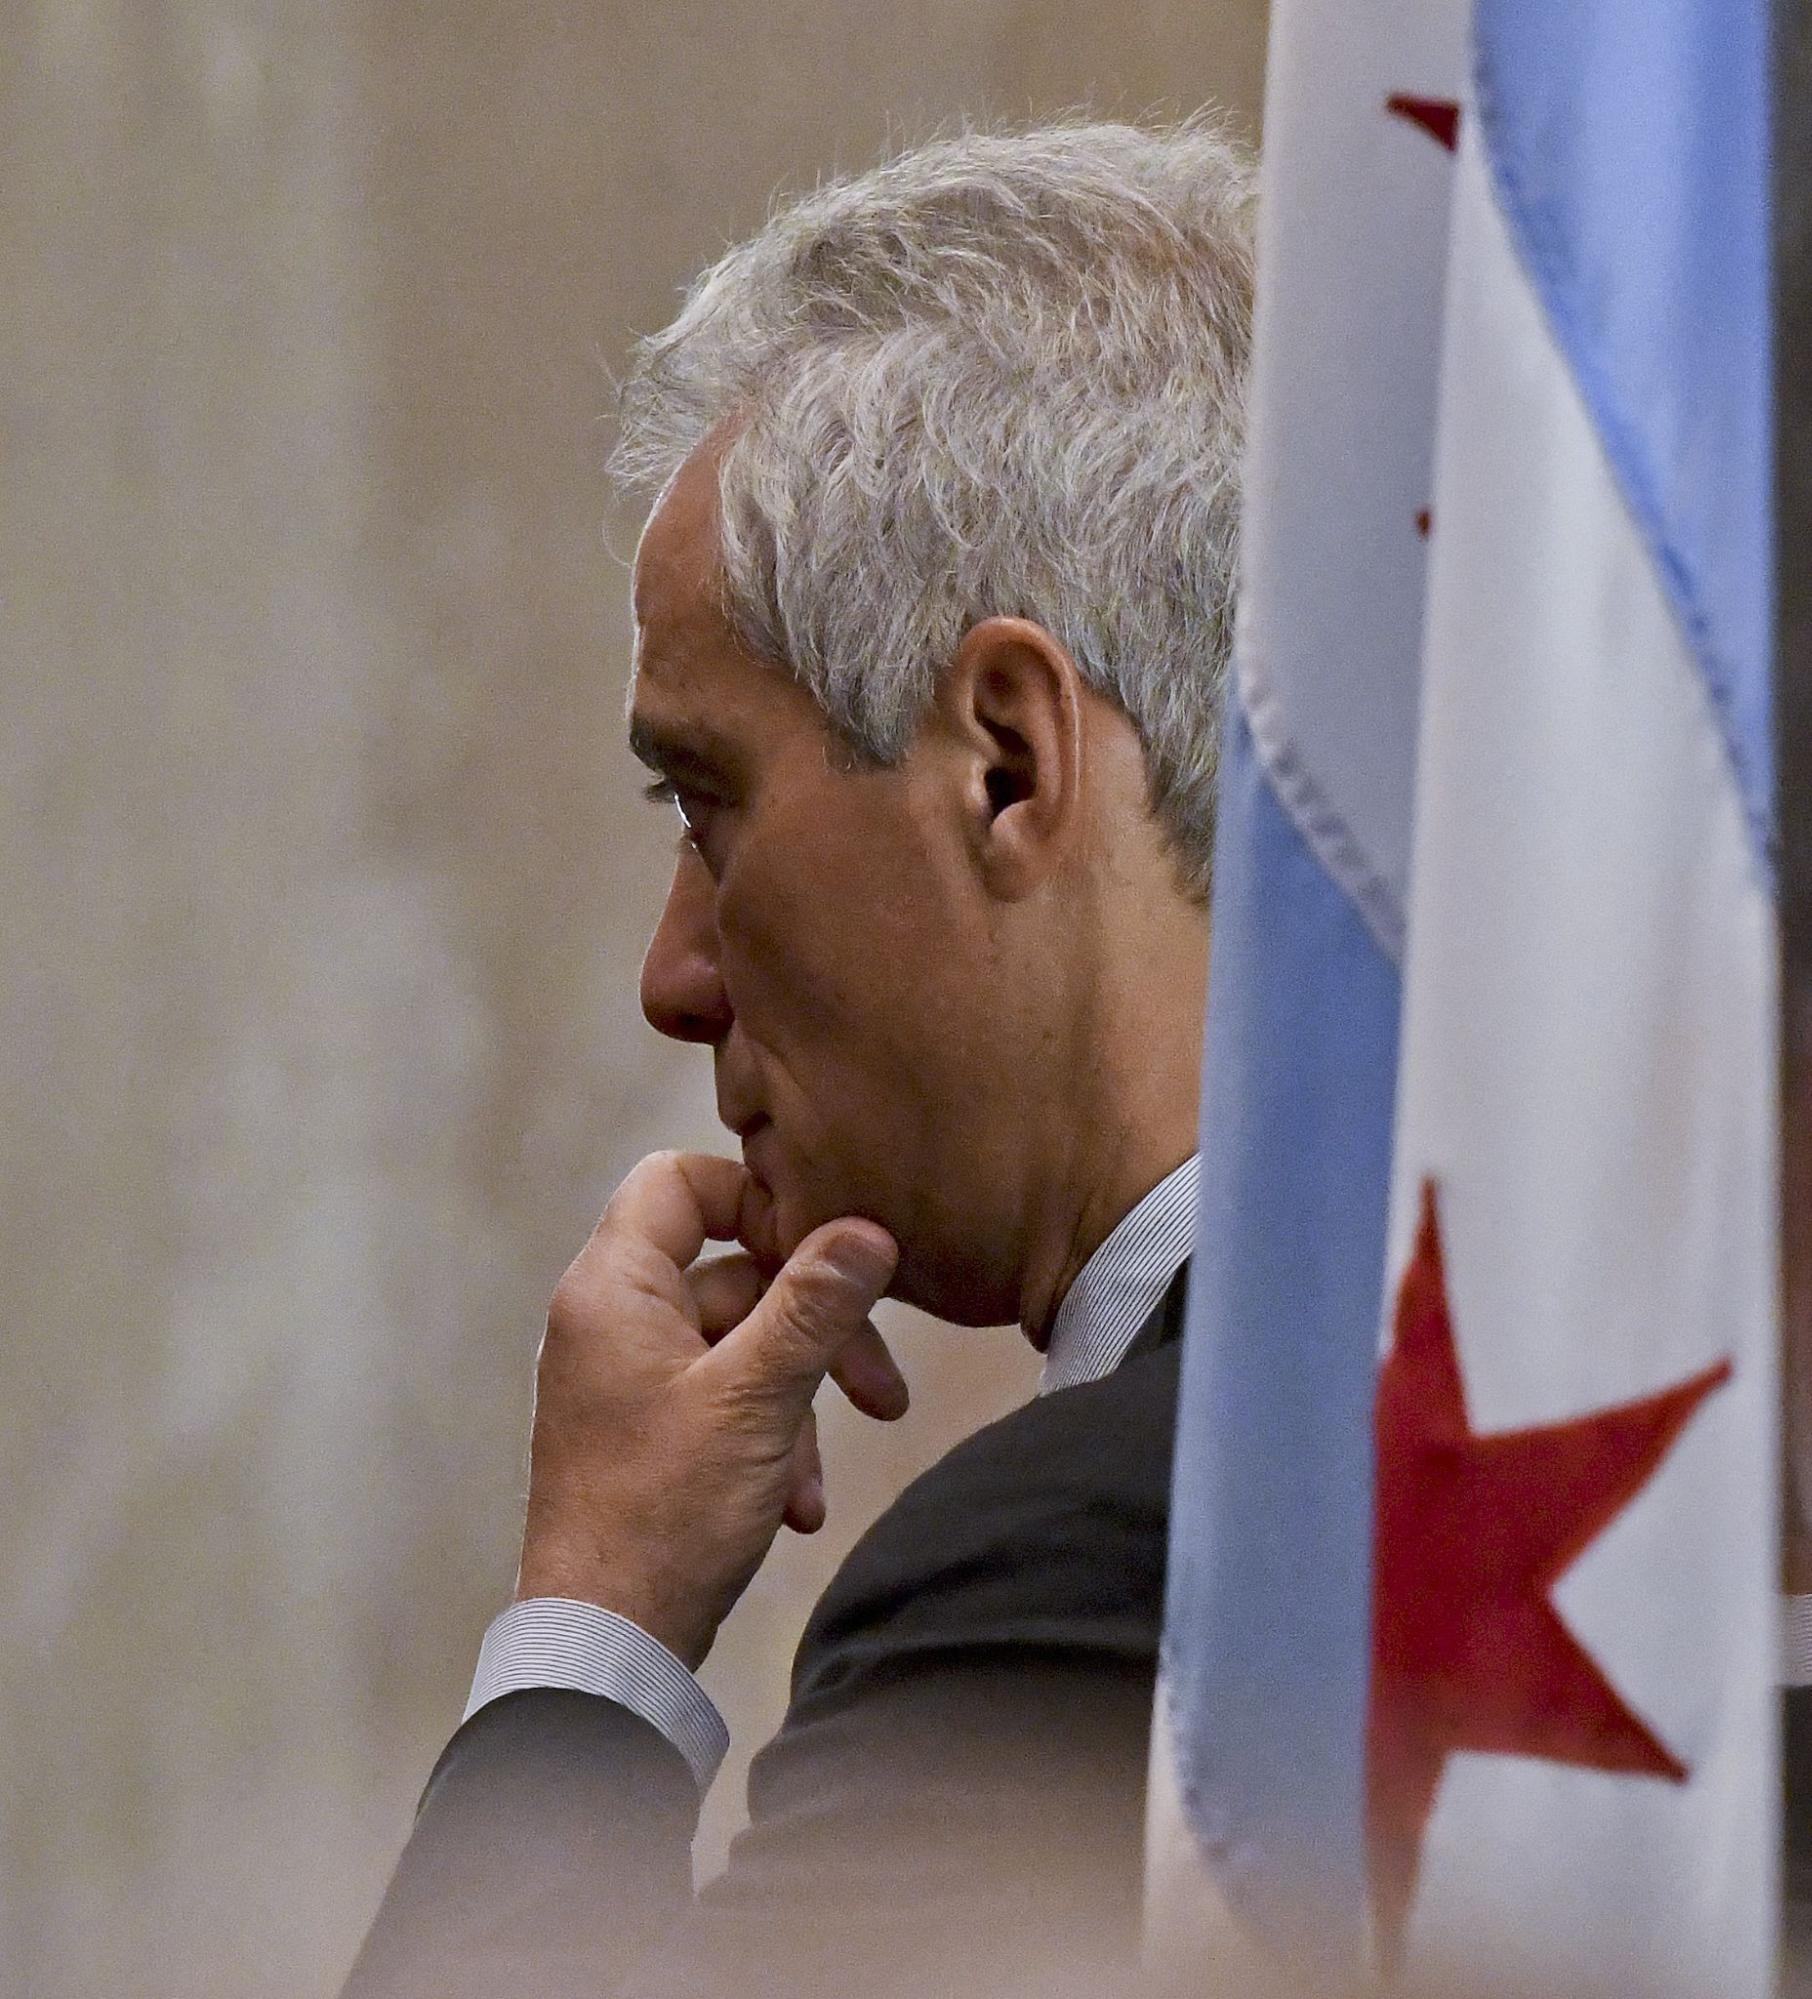 Photo of a man with grey hair in a suit from behind his left shoulder with a tan background. He holds his left hand to his chin. A Chicago flag is out of focus in the foreground.